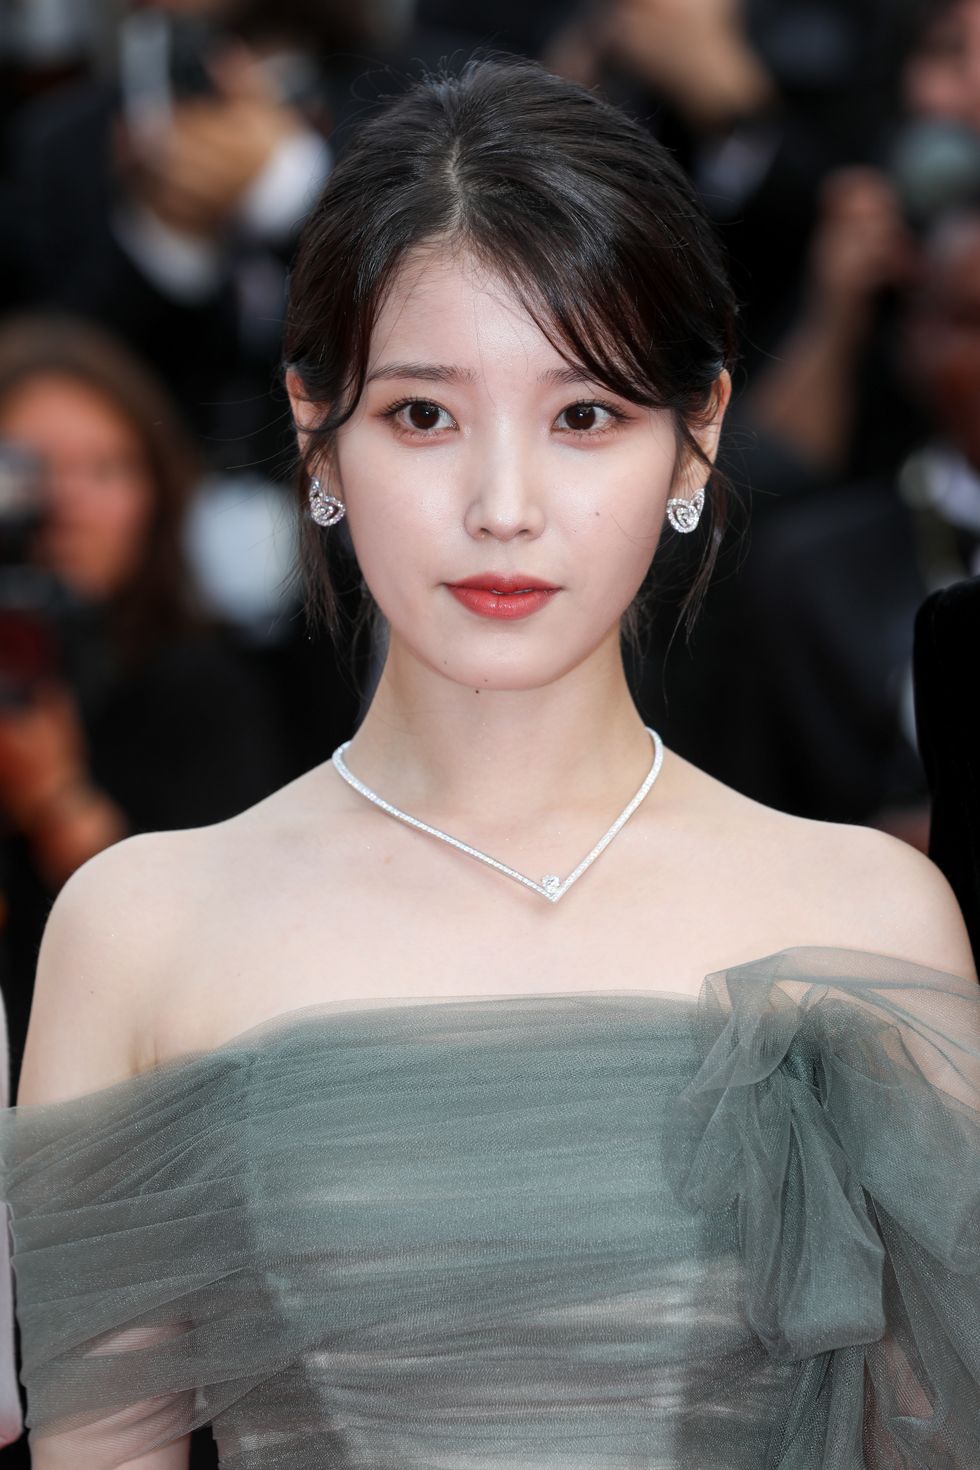 cannes, france may 26 lee ji eun attend the screening of broker les bonnes etoiles during the 75th annual cannes film festival at palais des festivals on may 26, 2022 in cannes, france photo by stephane cardinale corbiscorbis via getty images